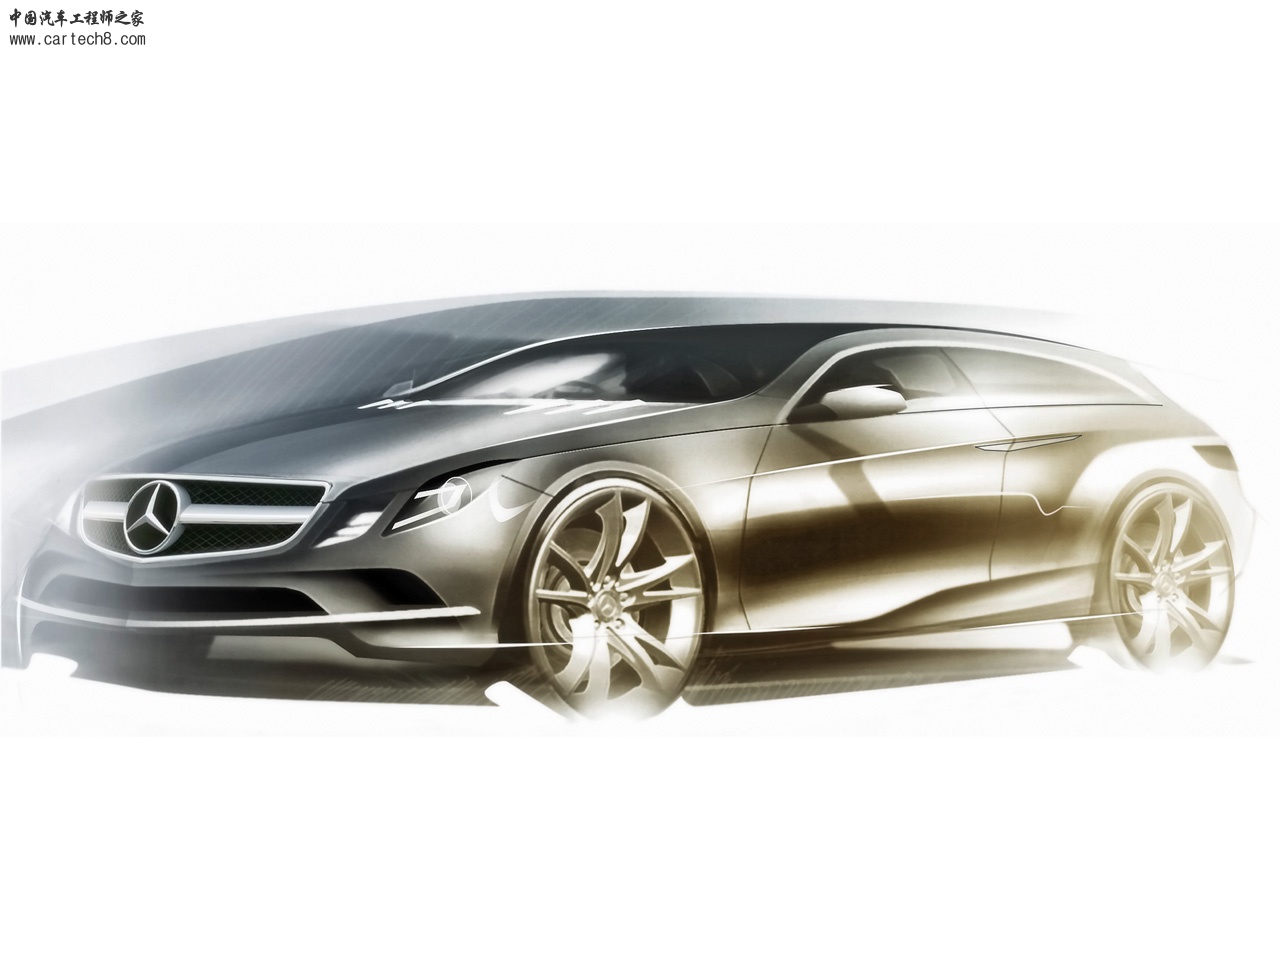 2008-Mercedes-Benz-ConceptFASCINATION-Drawing-Front-And-Side-1280x960.jpg